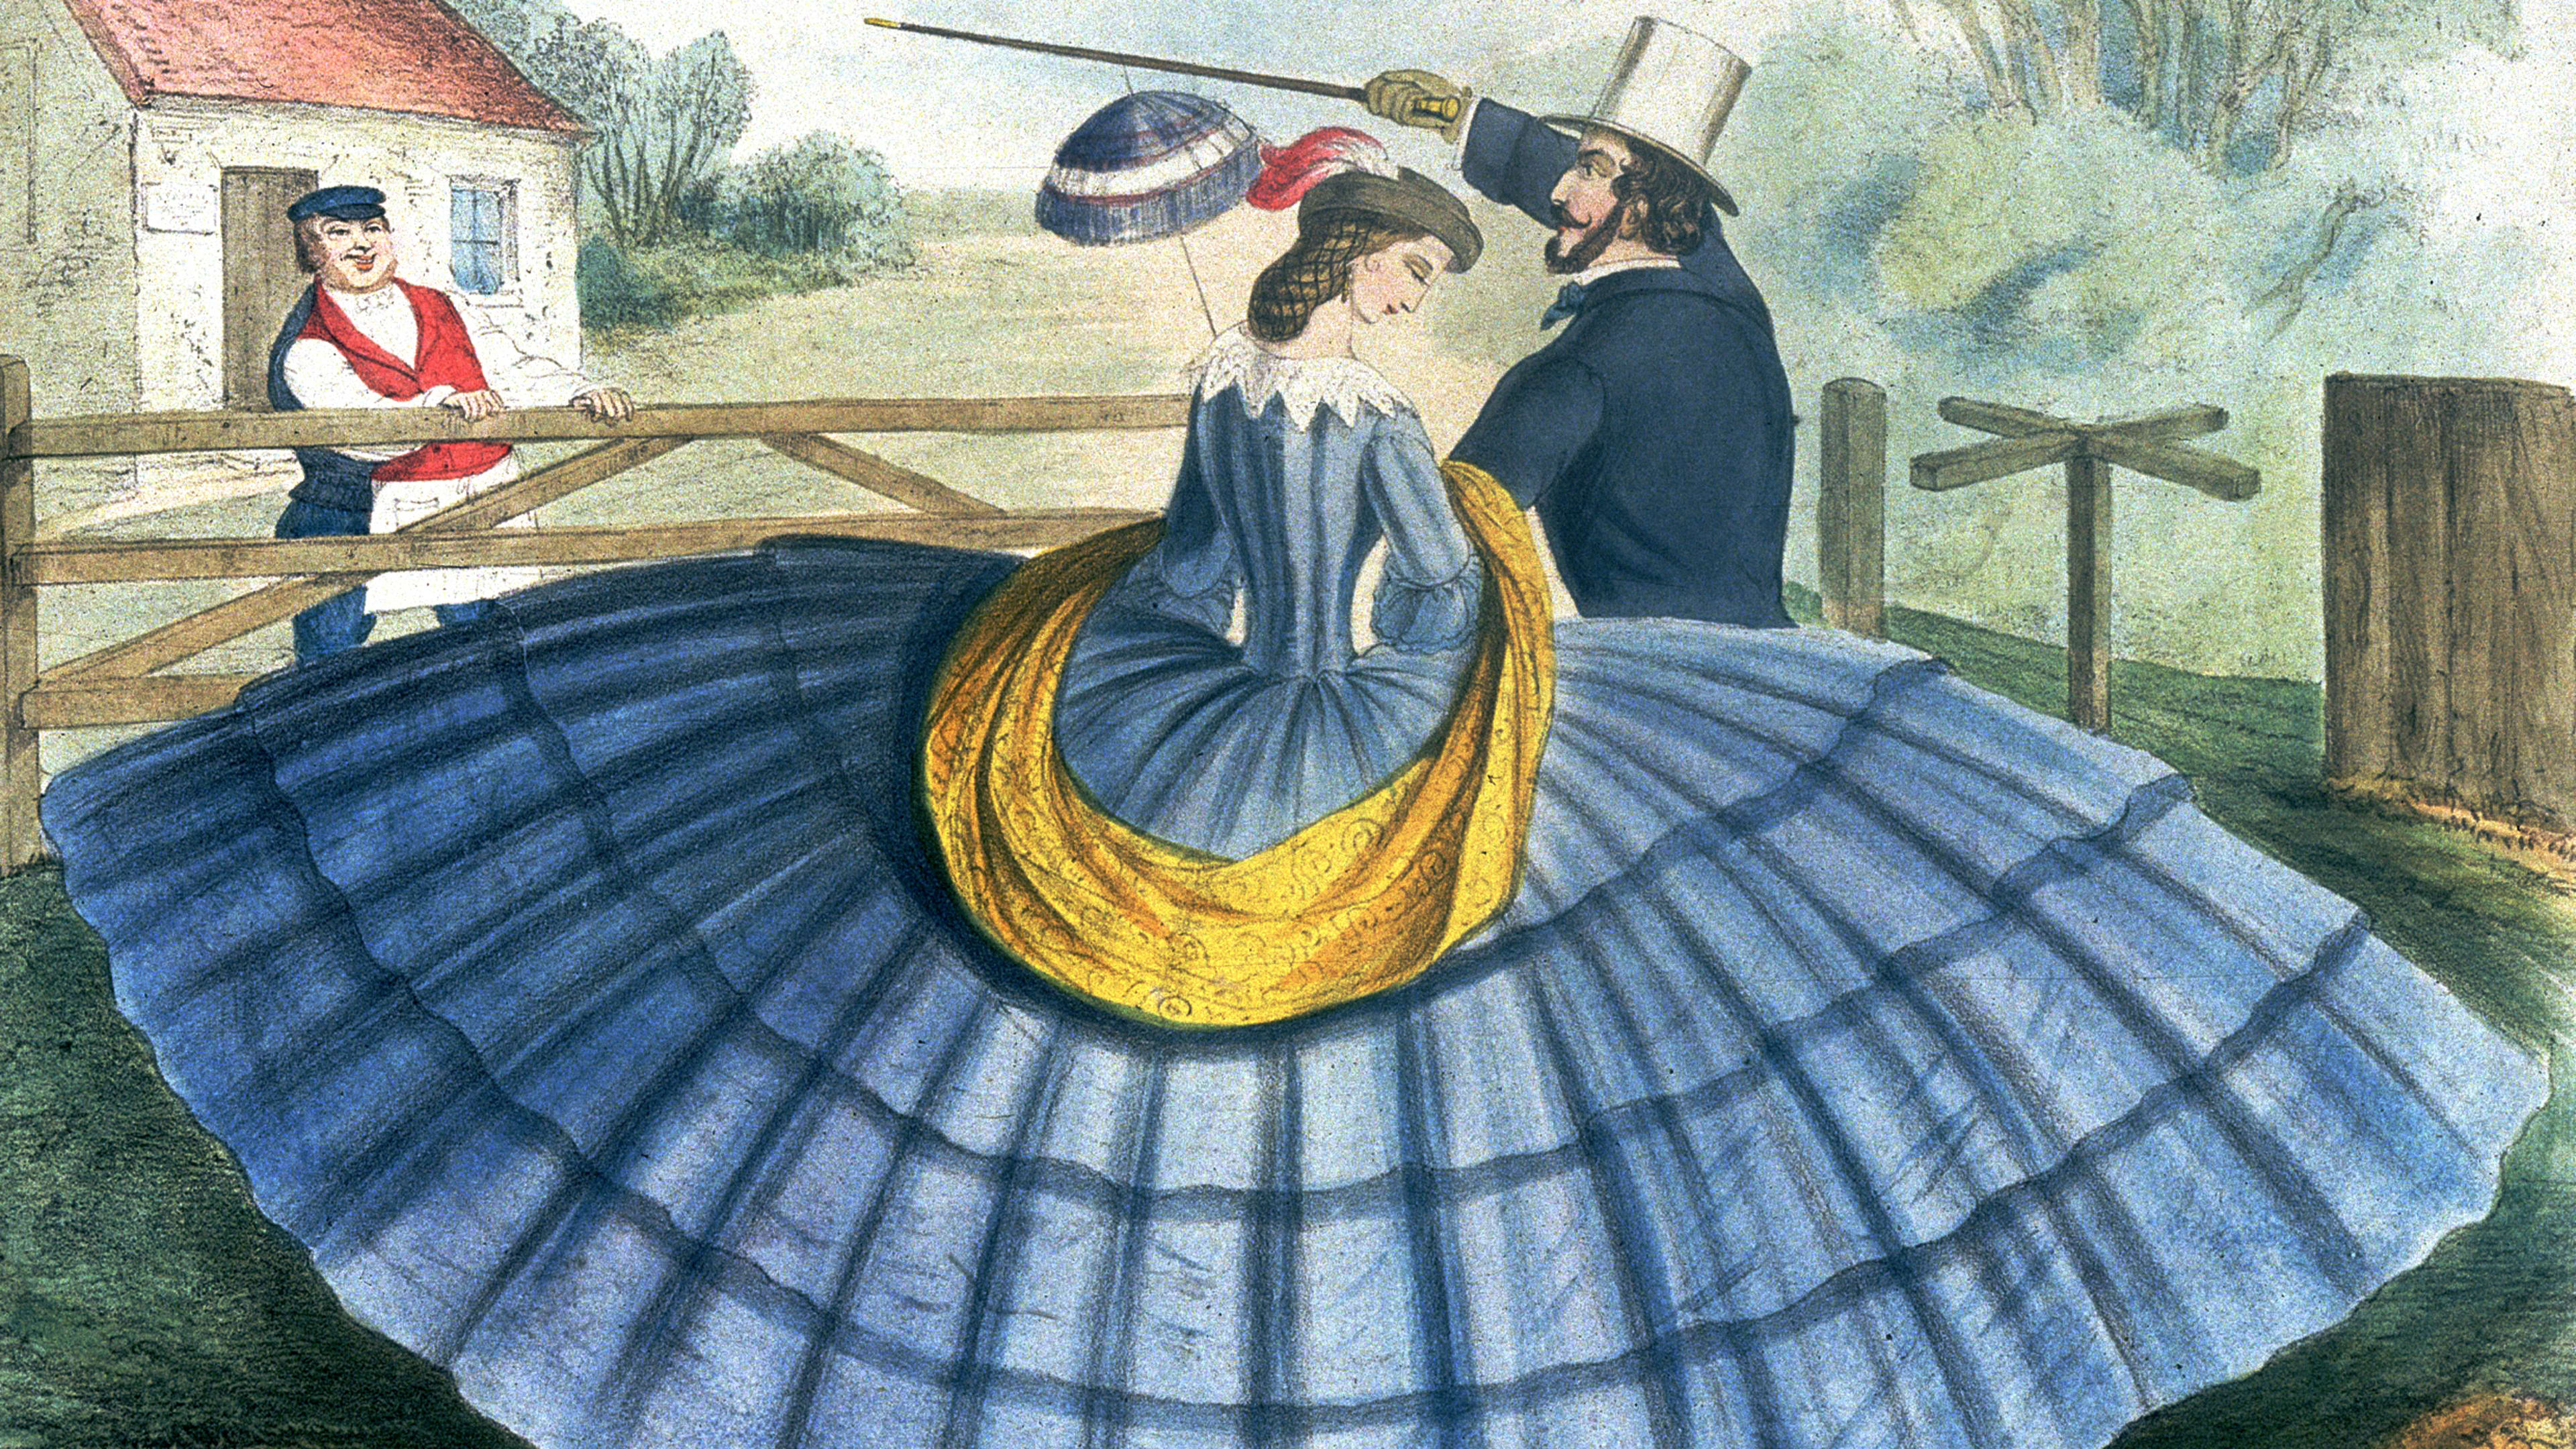 Masks, bells, crinolines: How fashion enabled social distancing through the ages